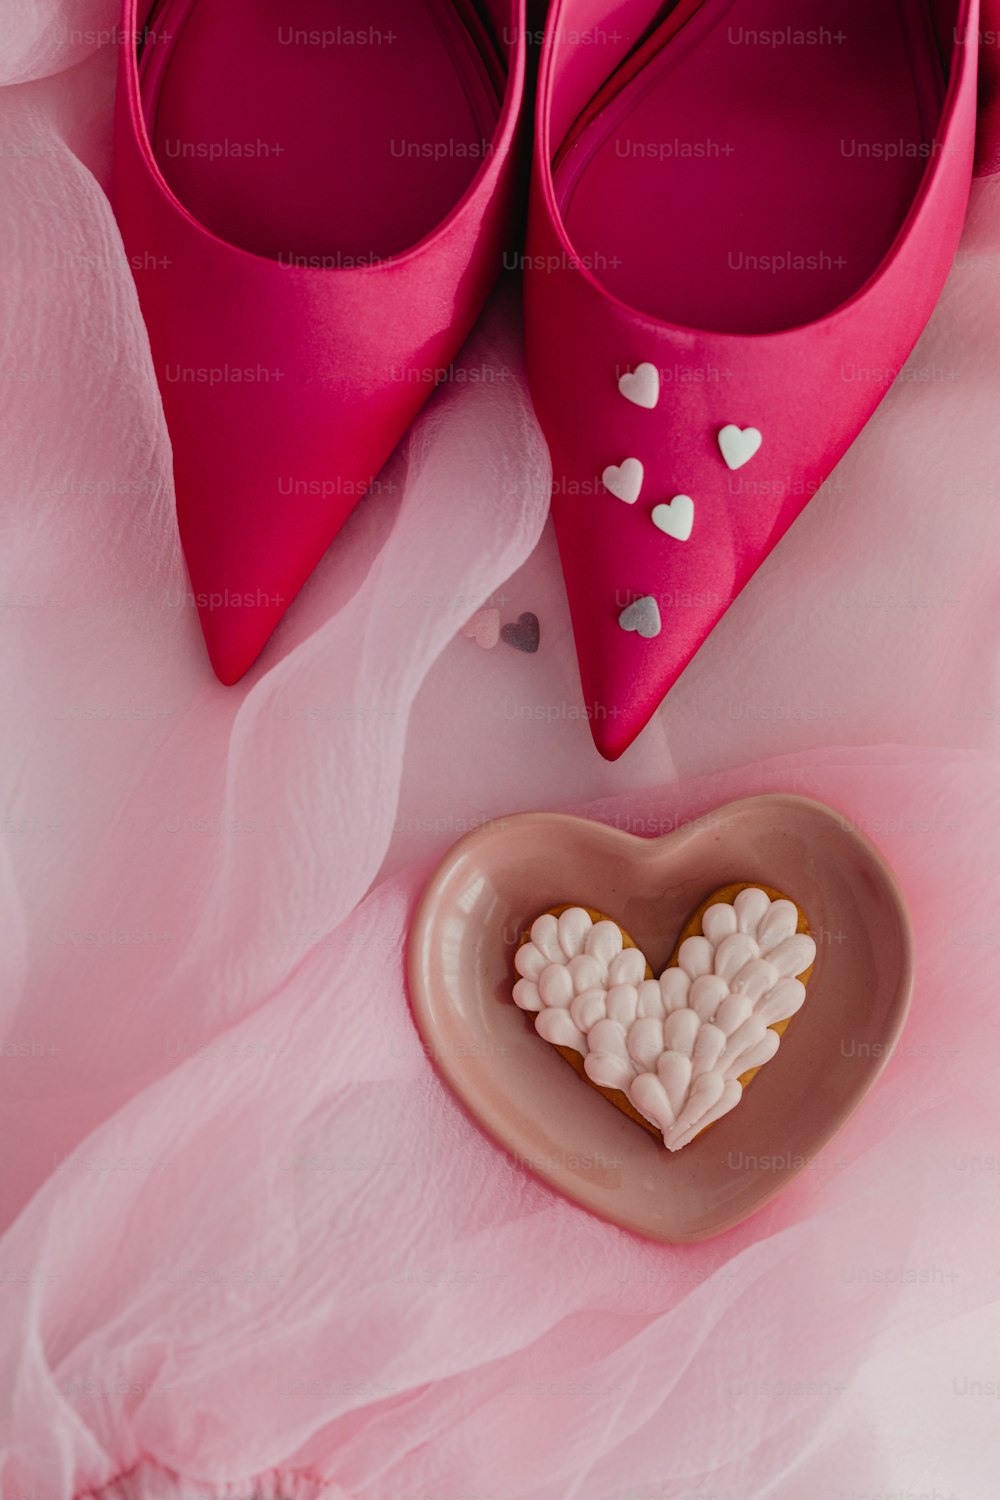 a pair of pink shoes next to a heart shaped cookie